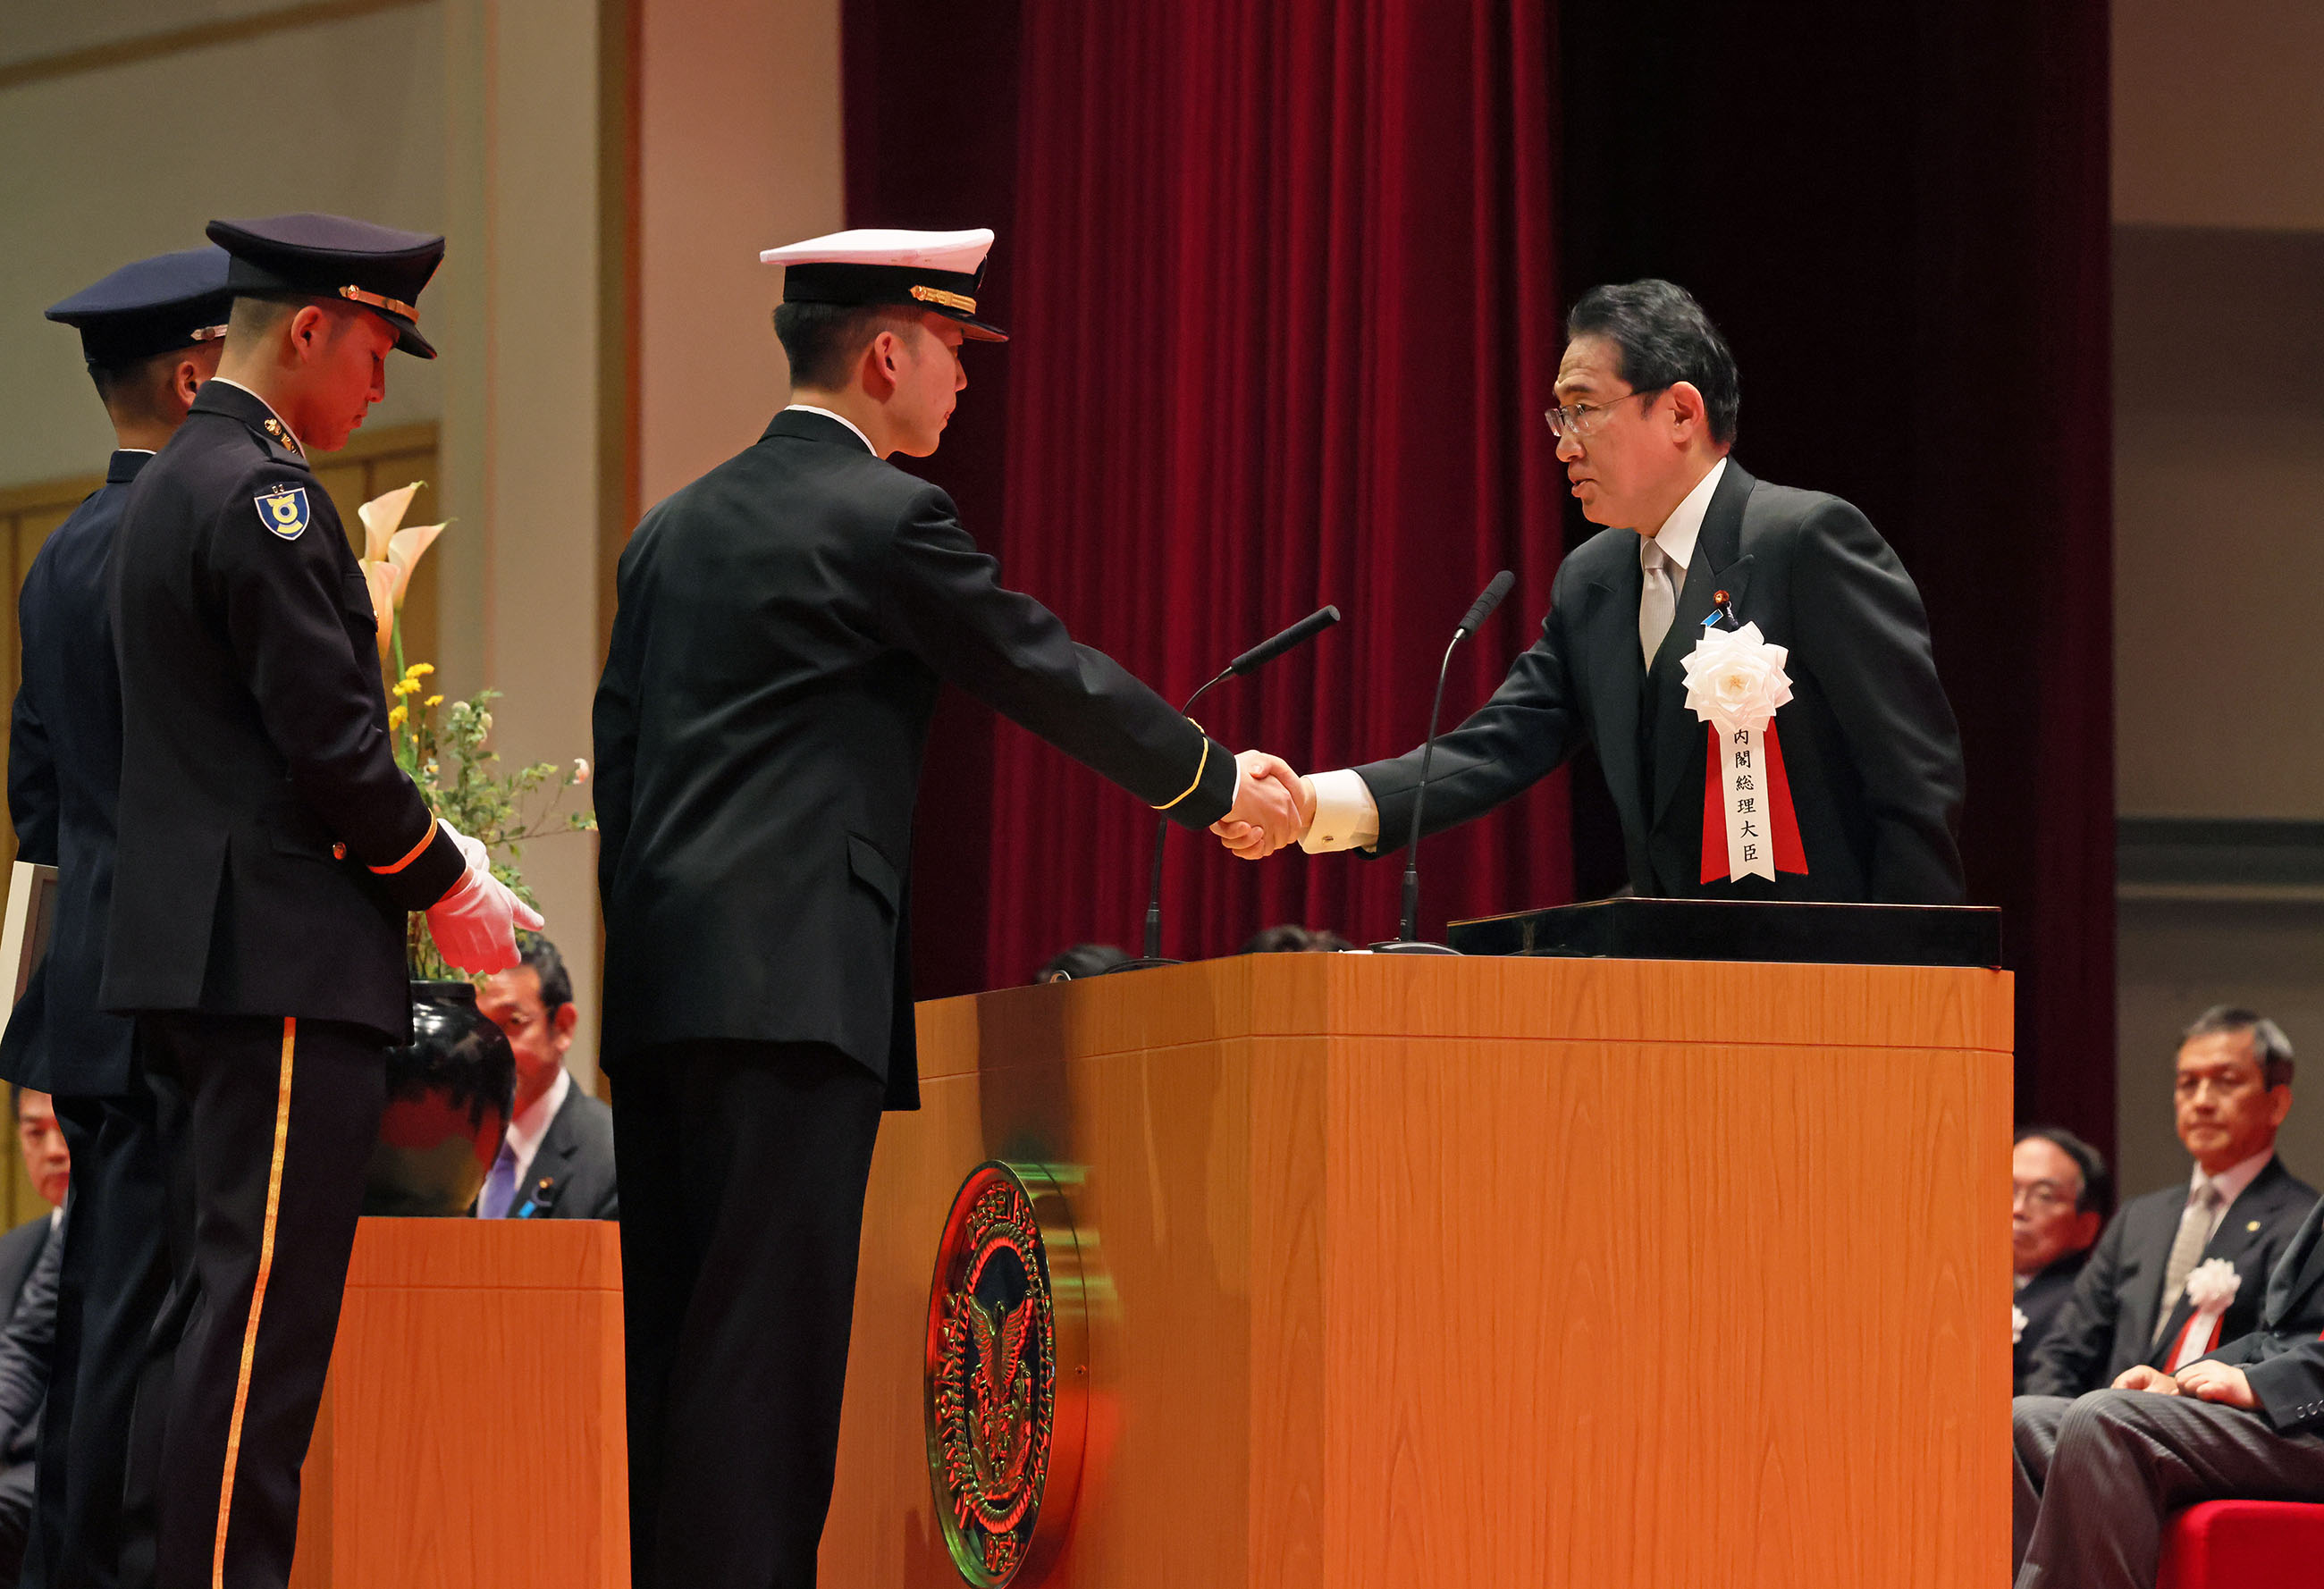 Prime Minister Kishida attending the assignment and oath of service ceremony (4)